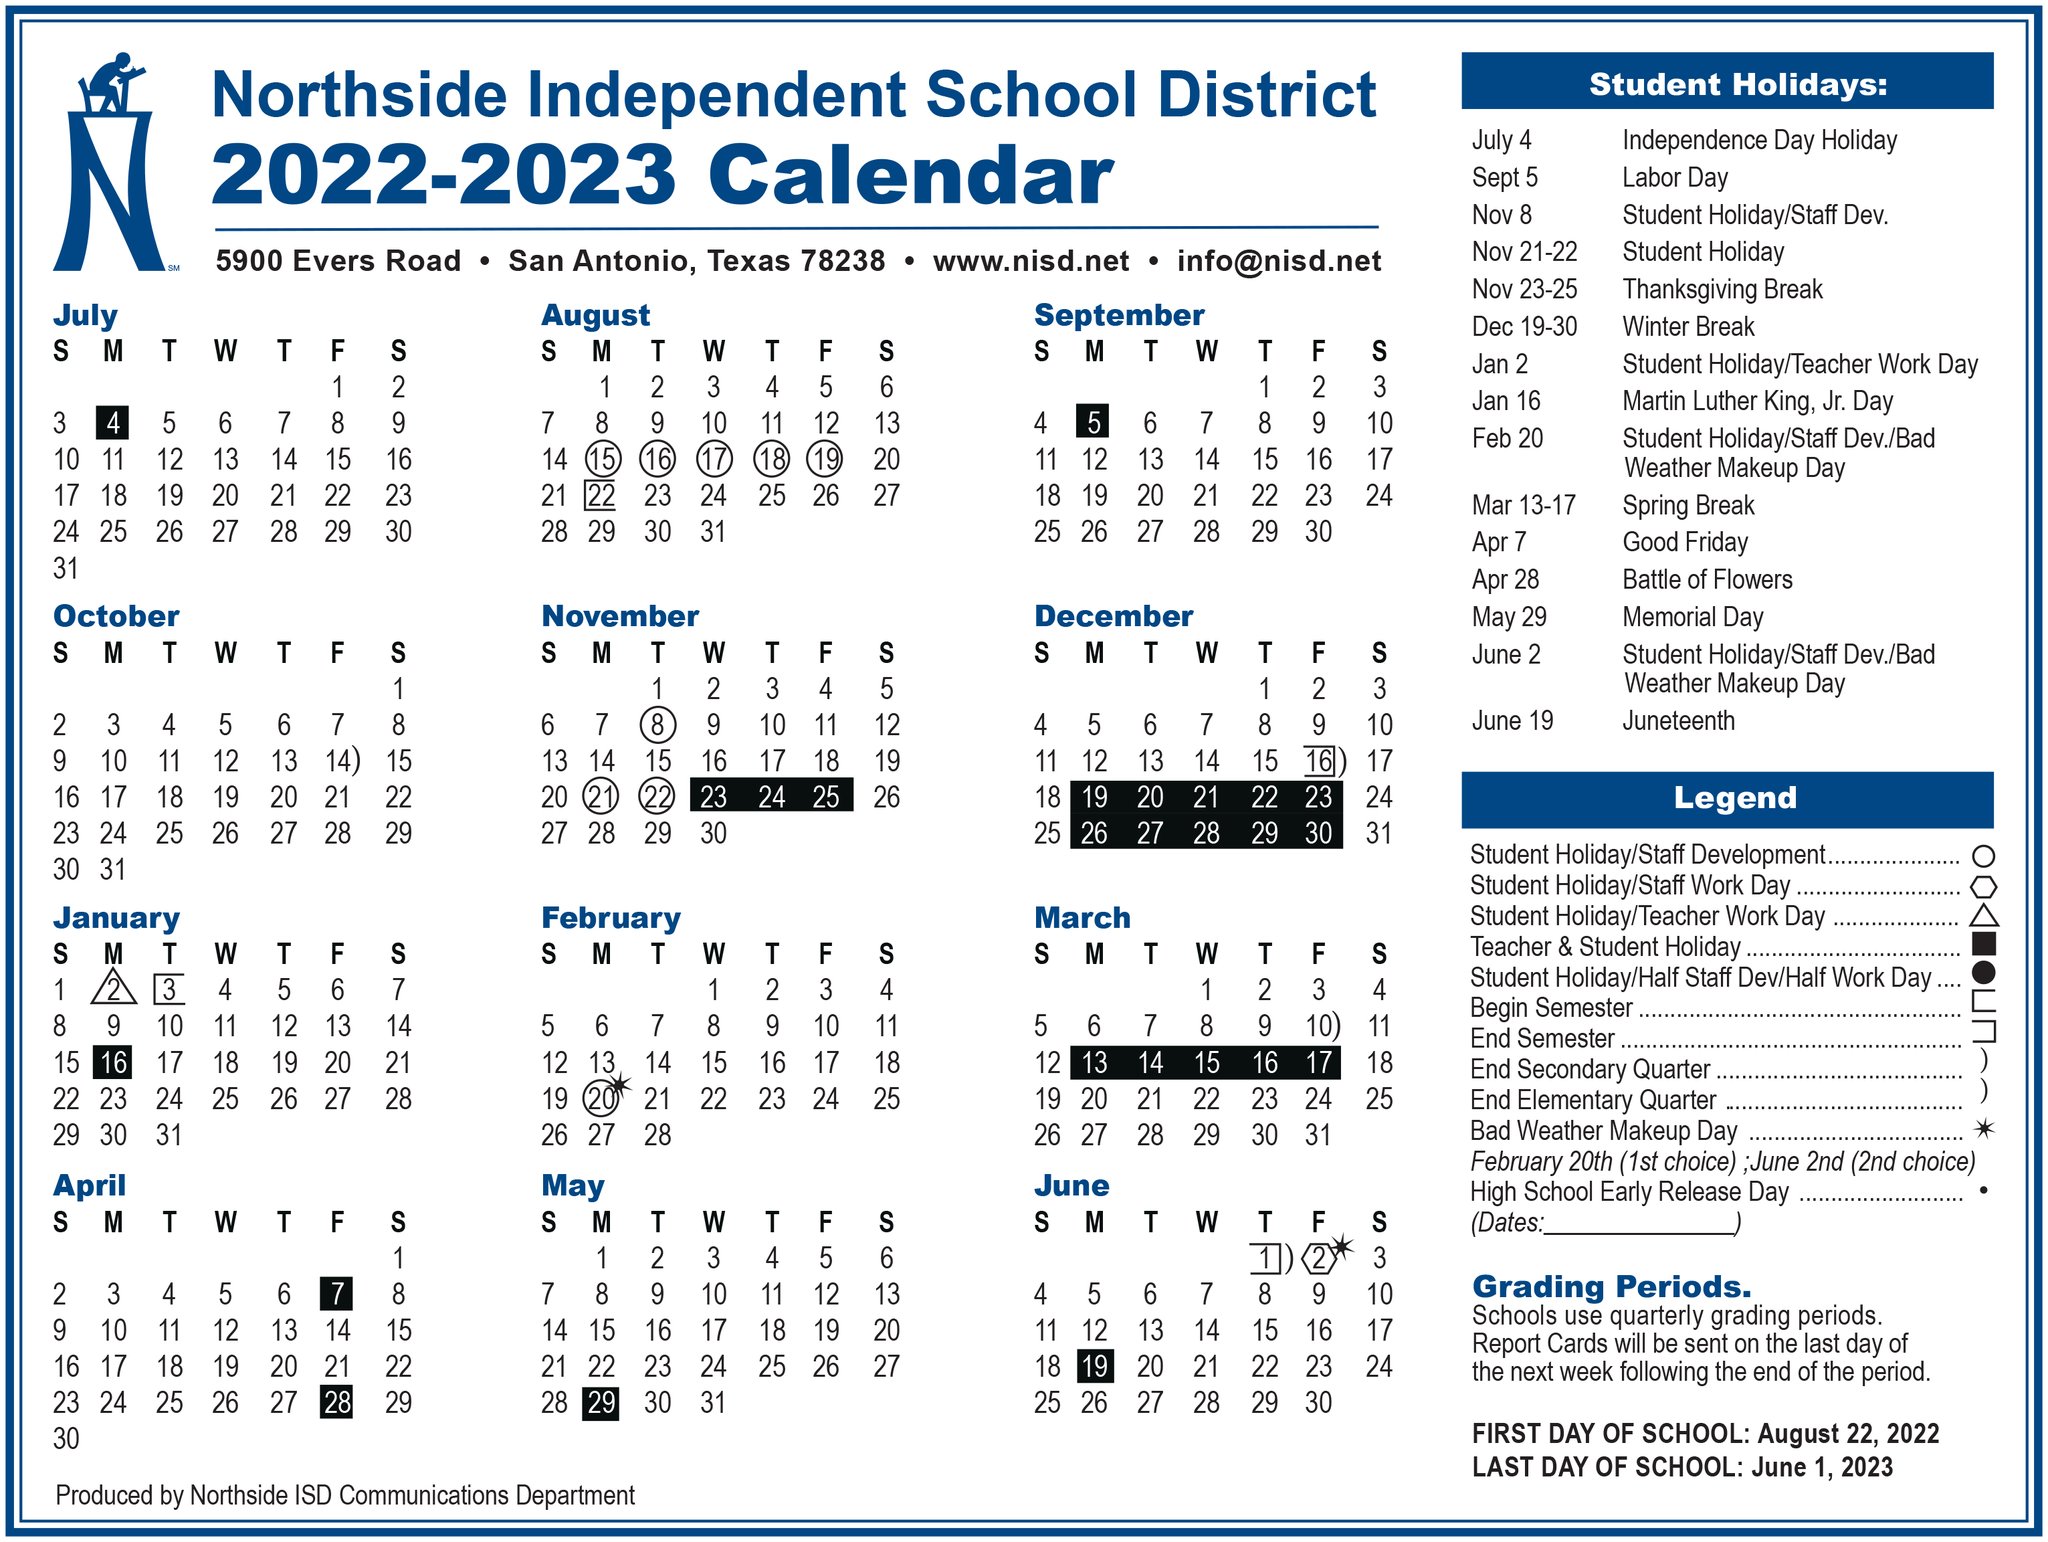 northside-isd-on-twitter-here-s-the-newly-approved-calendar-for-the-2022-2023-school-year-you